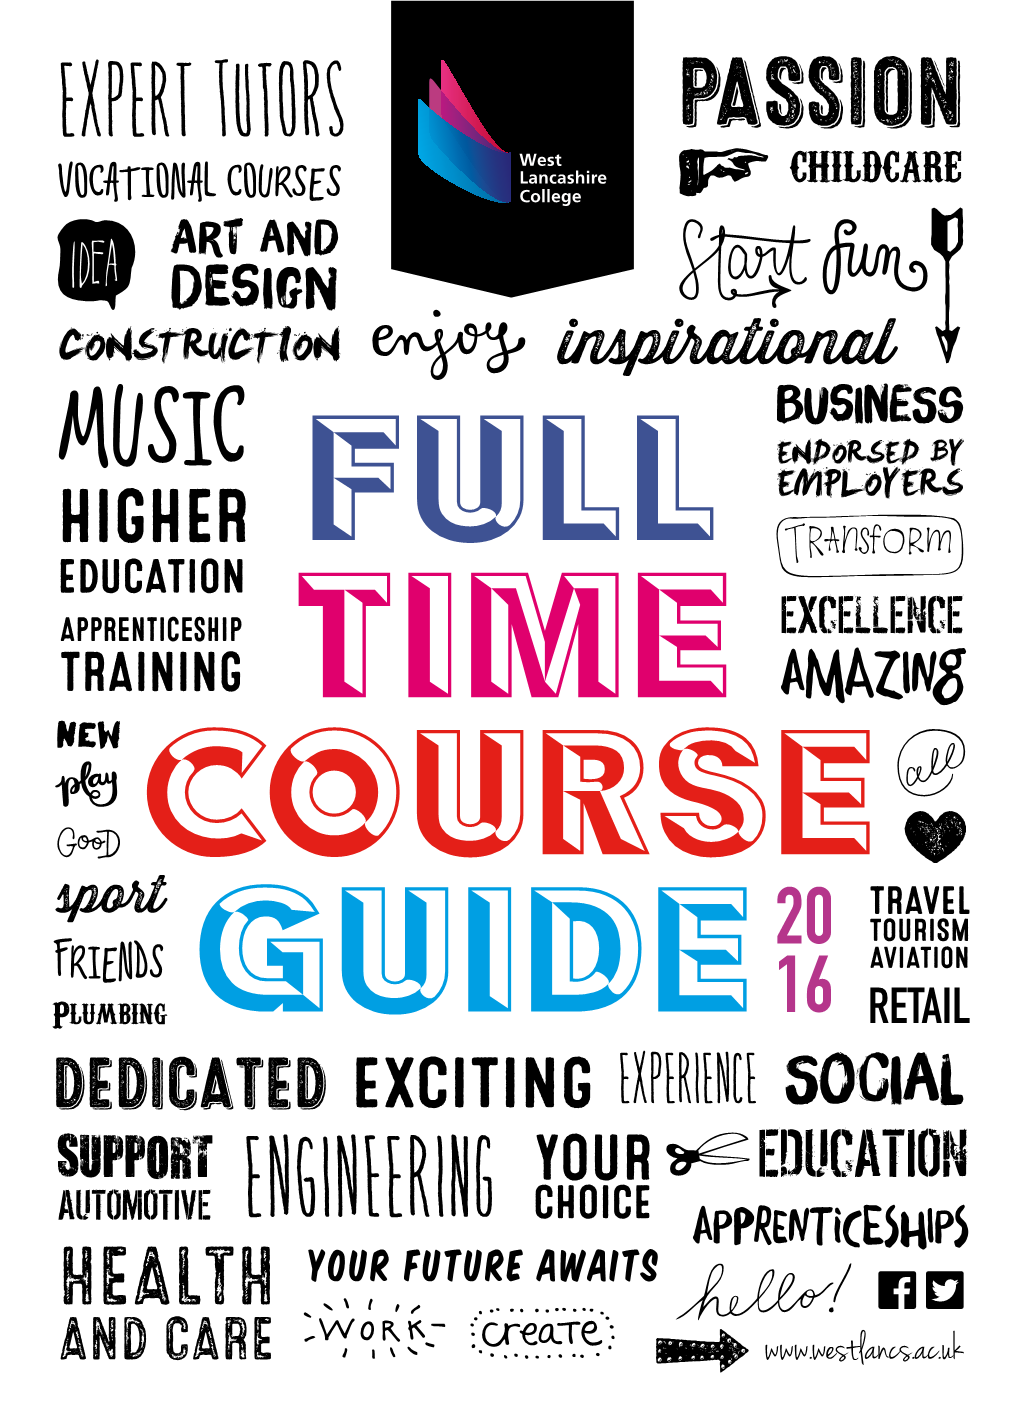 Engineering Your Future Awaits and Care 2 Full-Time Course Guide 2016 1